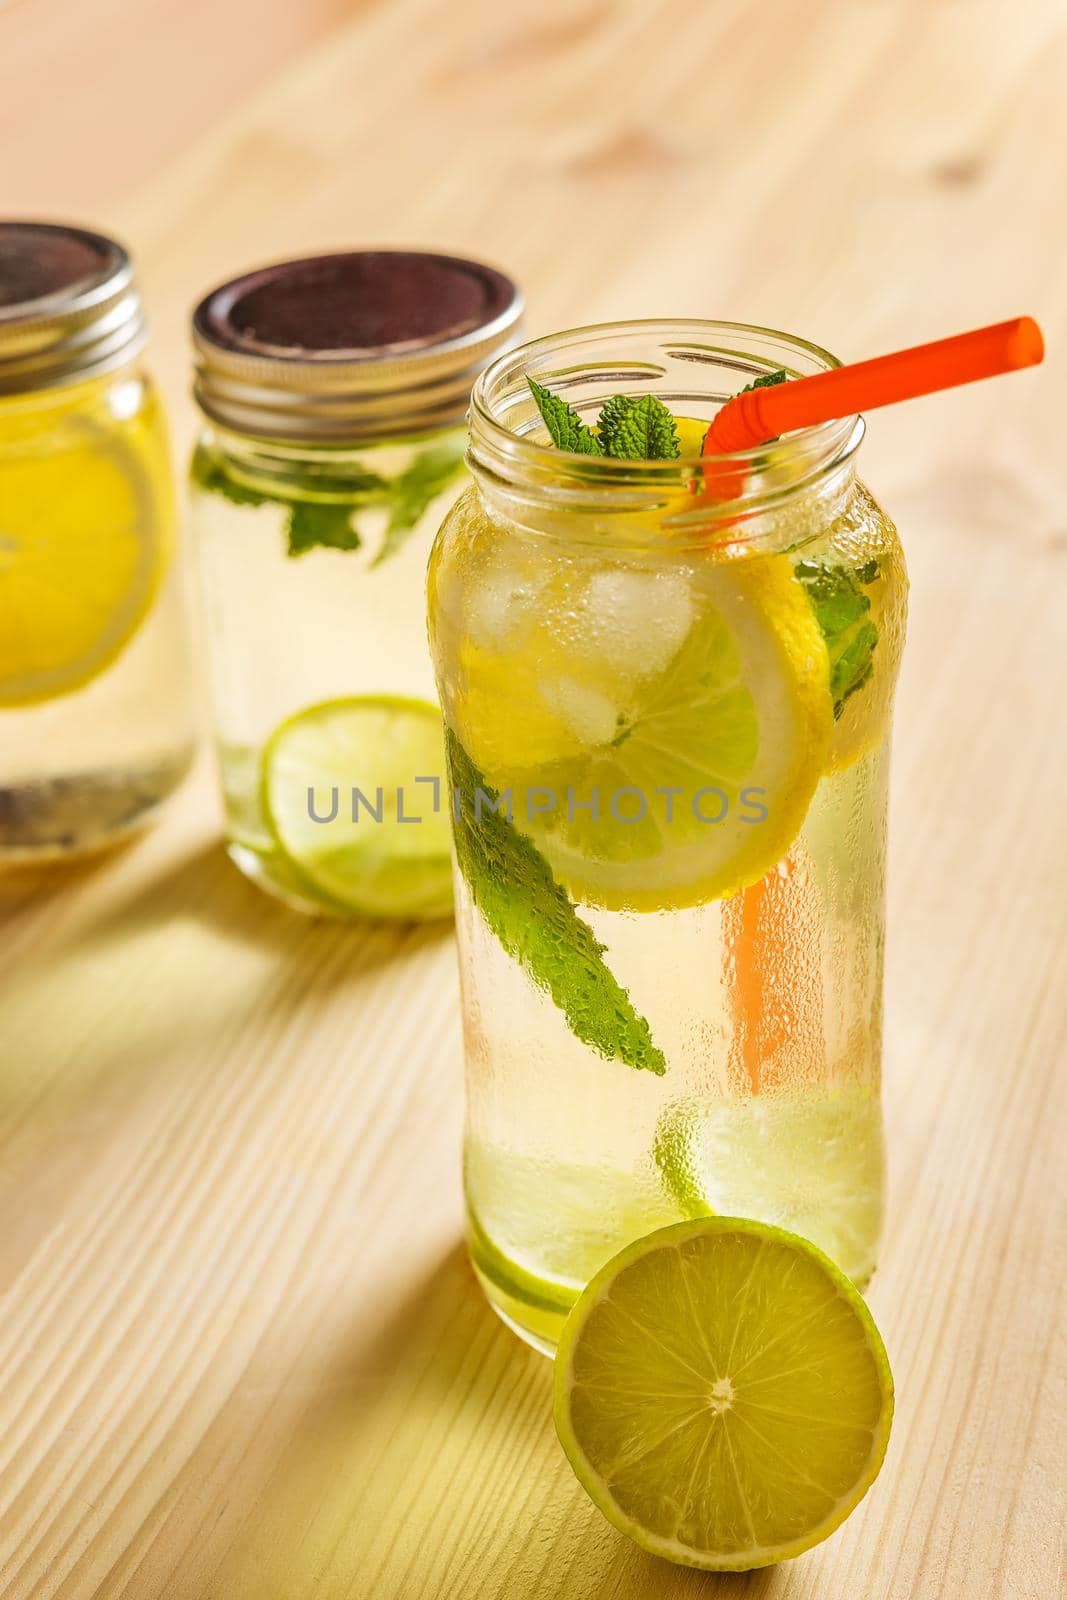 vertical image os a glass jar full of water with ice, slices of lemon, lime and mint leaves, also has a cane to drink and another lemonade unfocused in the background, all is on a wooden table